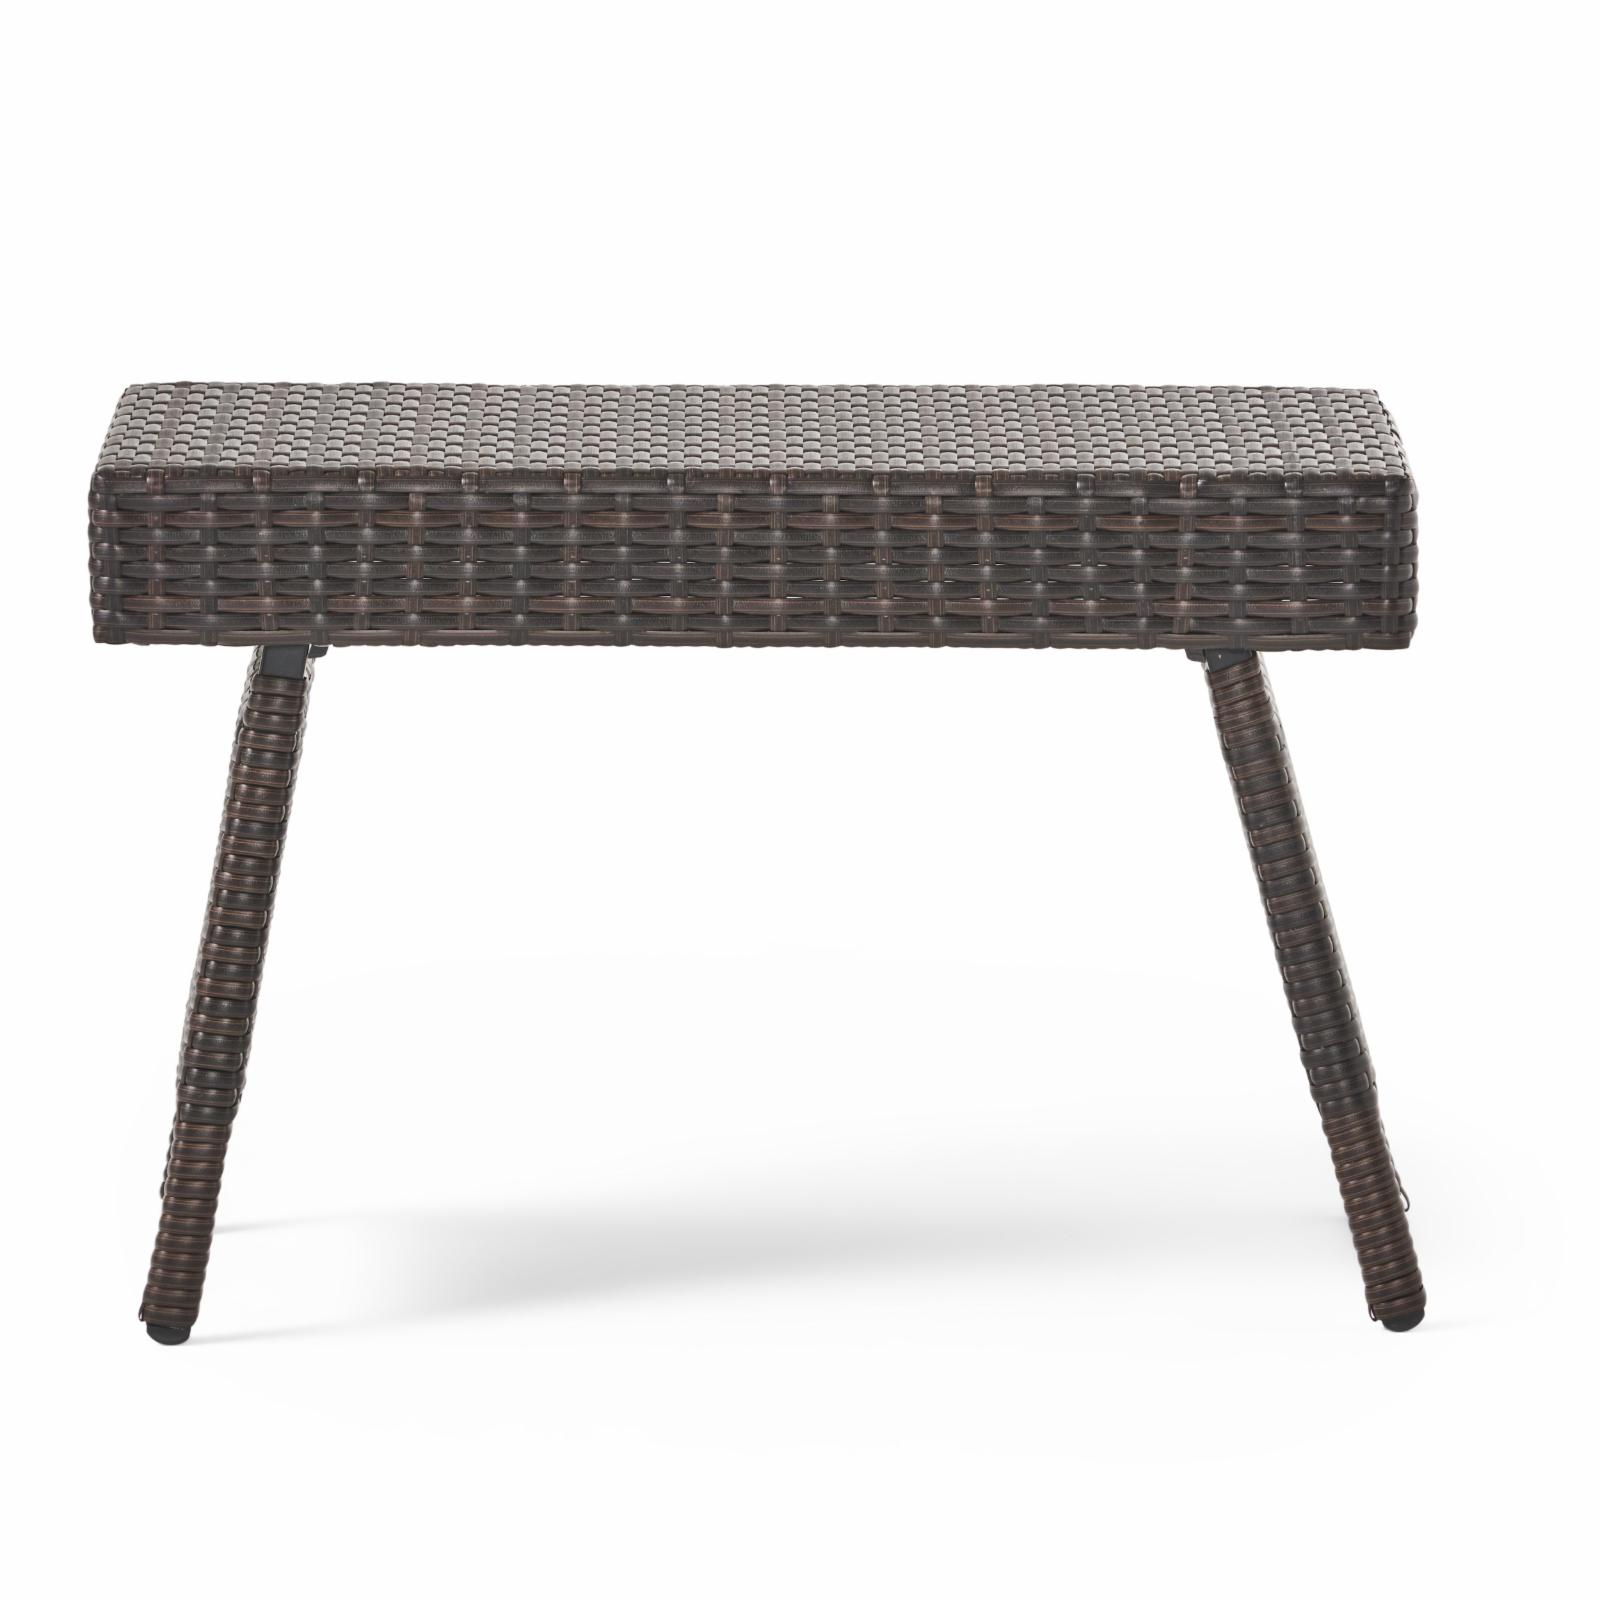 Christopher Knight Home Salem Outdoor Brown Wicker Adjustable Folding Table by  - 16.00 W x 24.00 L x 15.75 H Brown - image 2 of 8